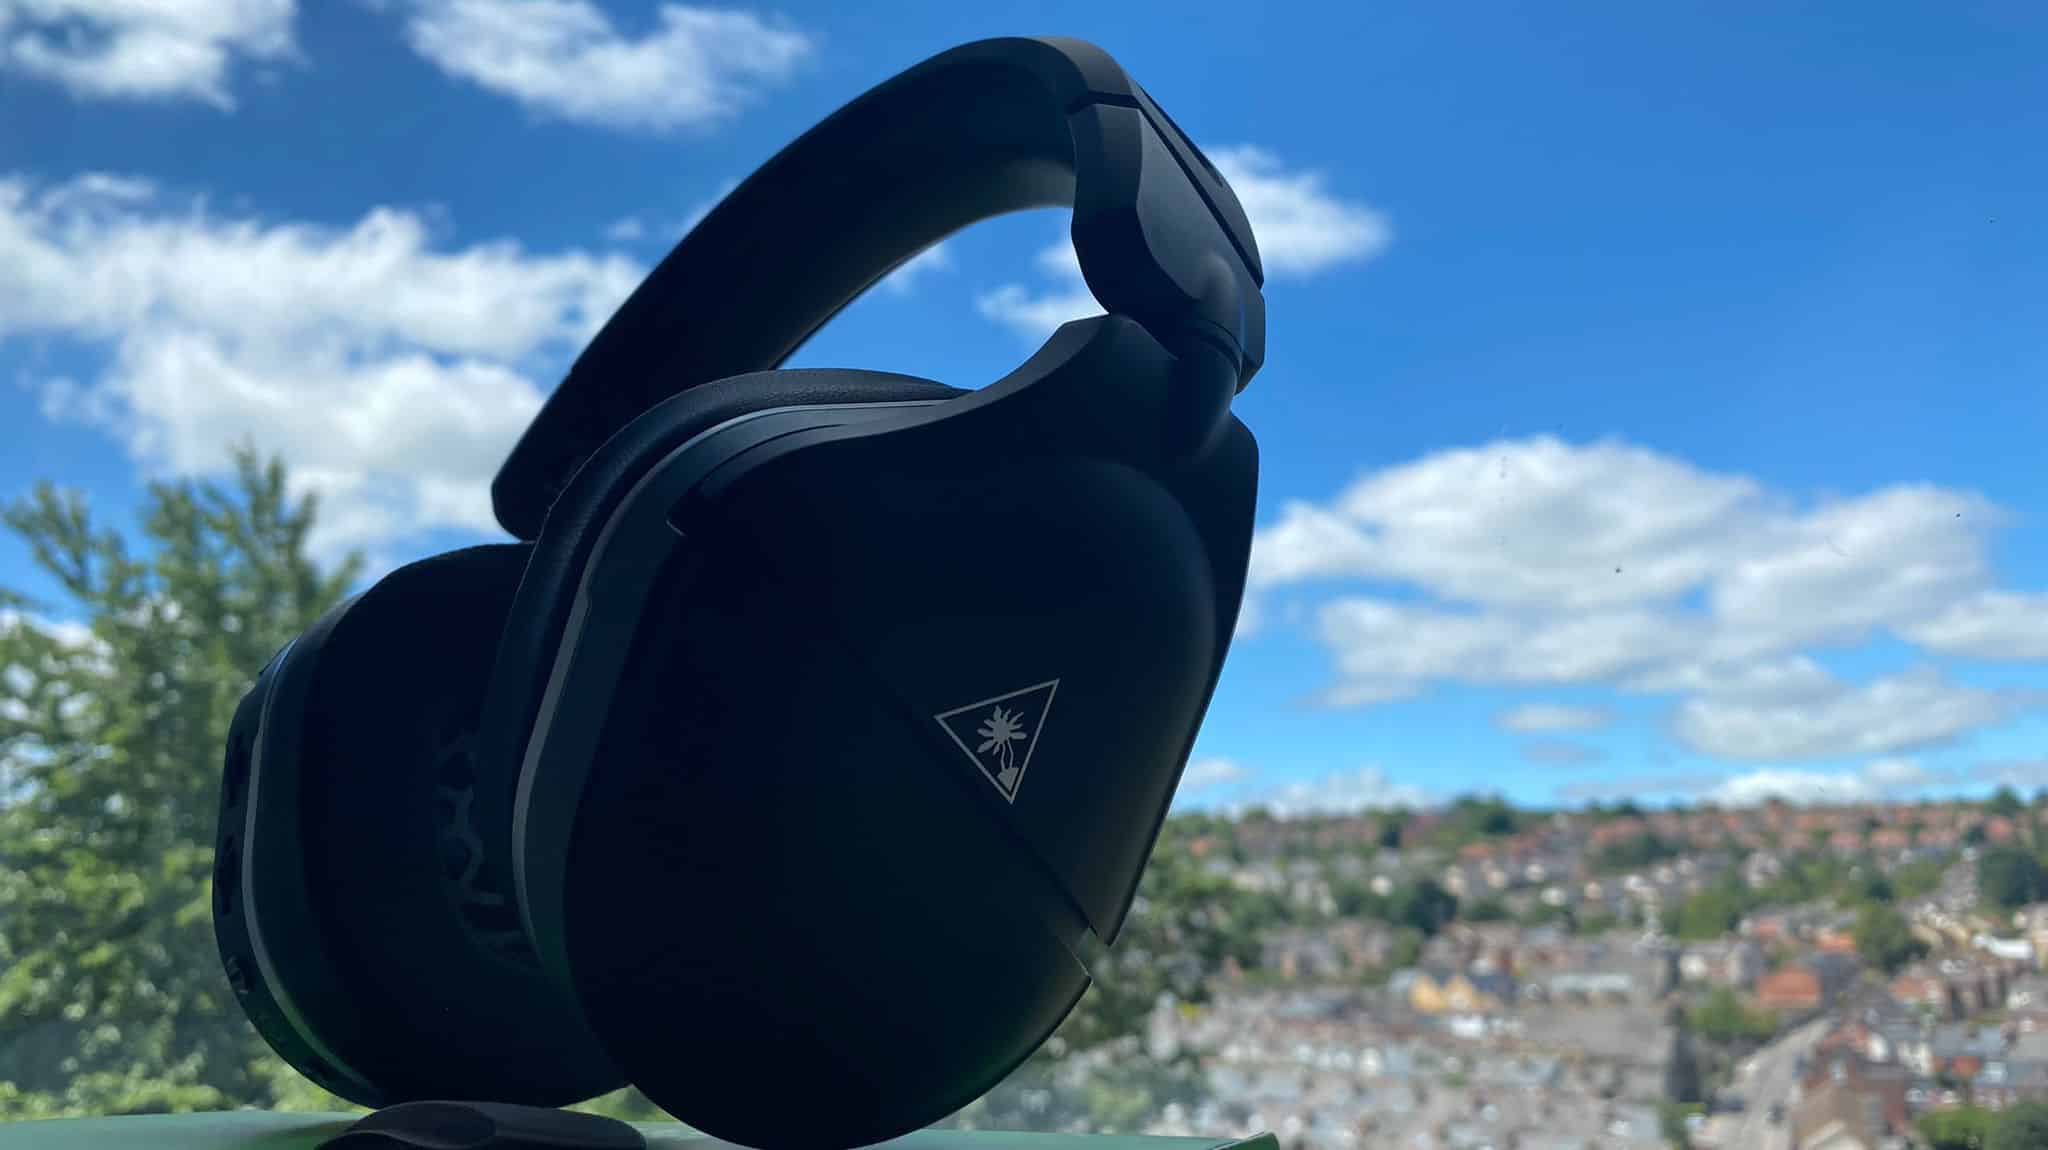 The Turtle Turtle Beach Stealth 700 Gen 2 Max gaming headset on a landscape background